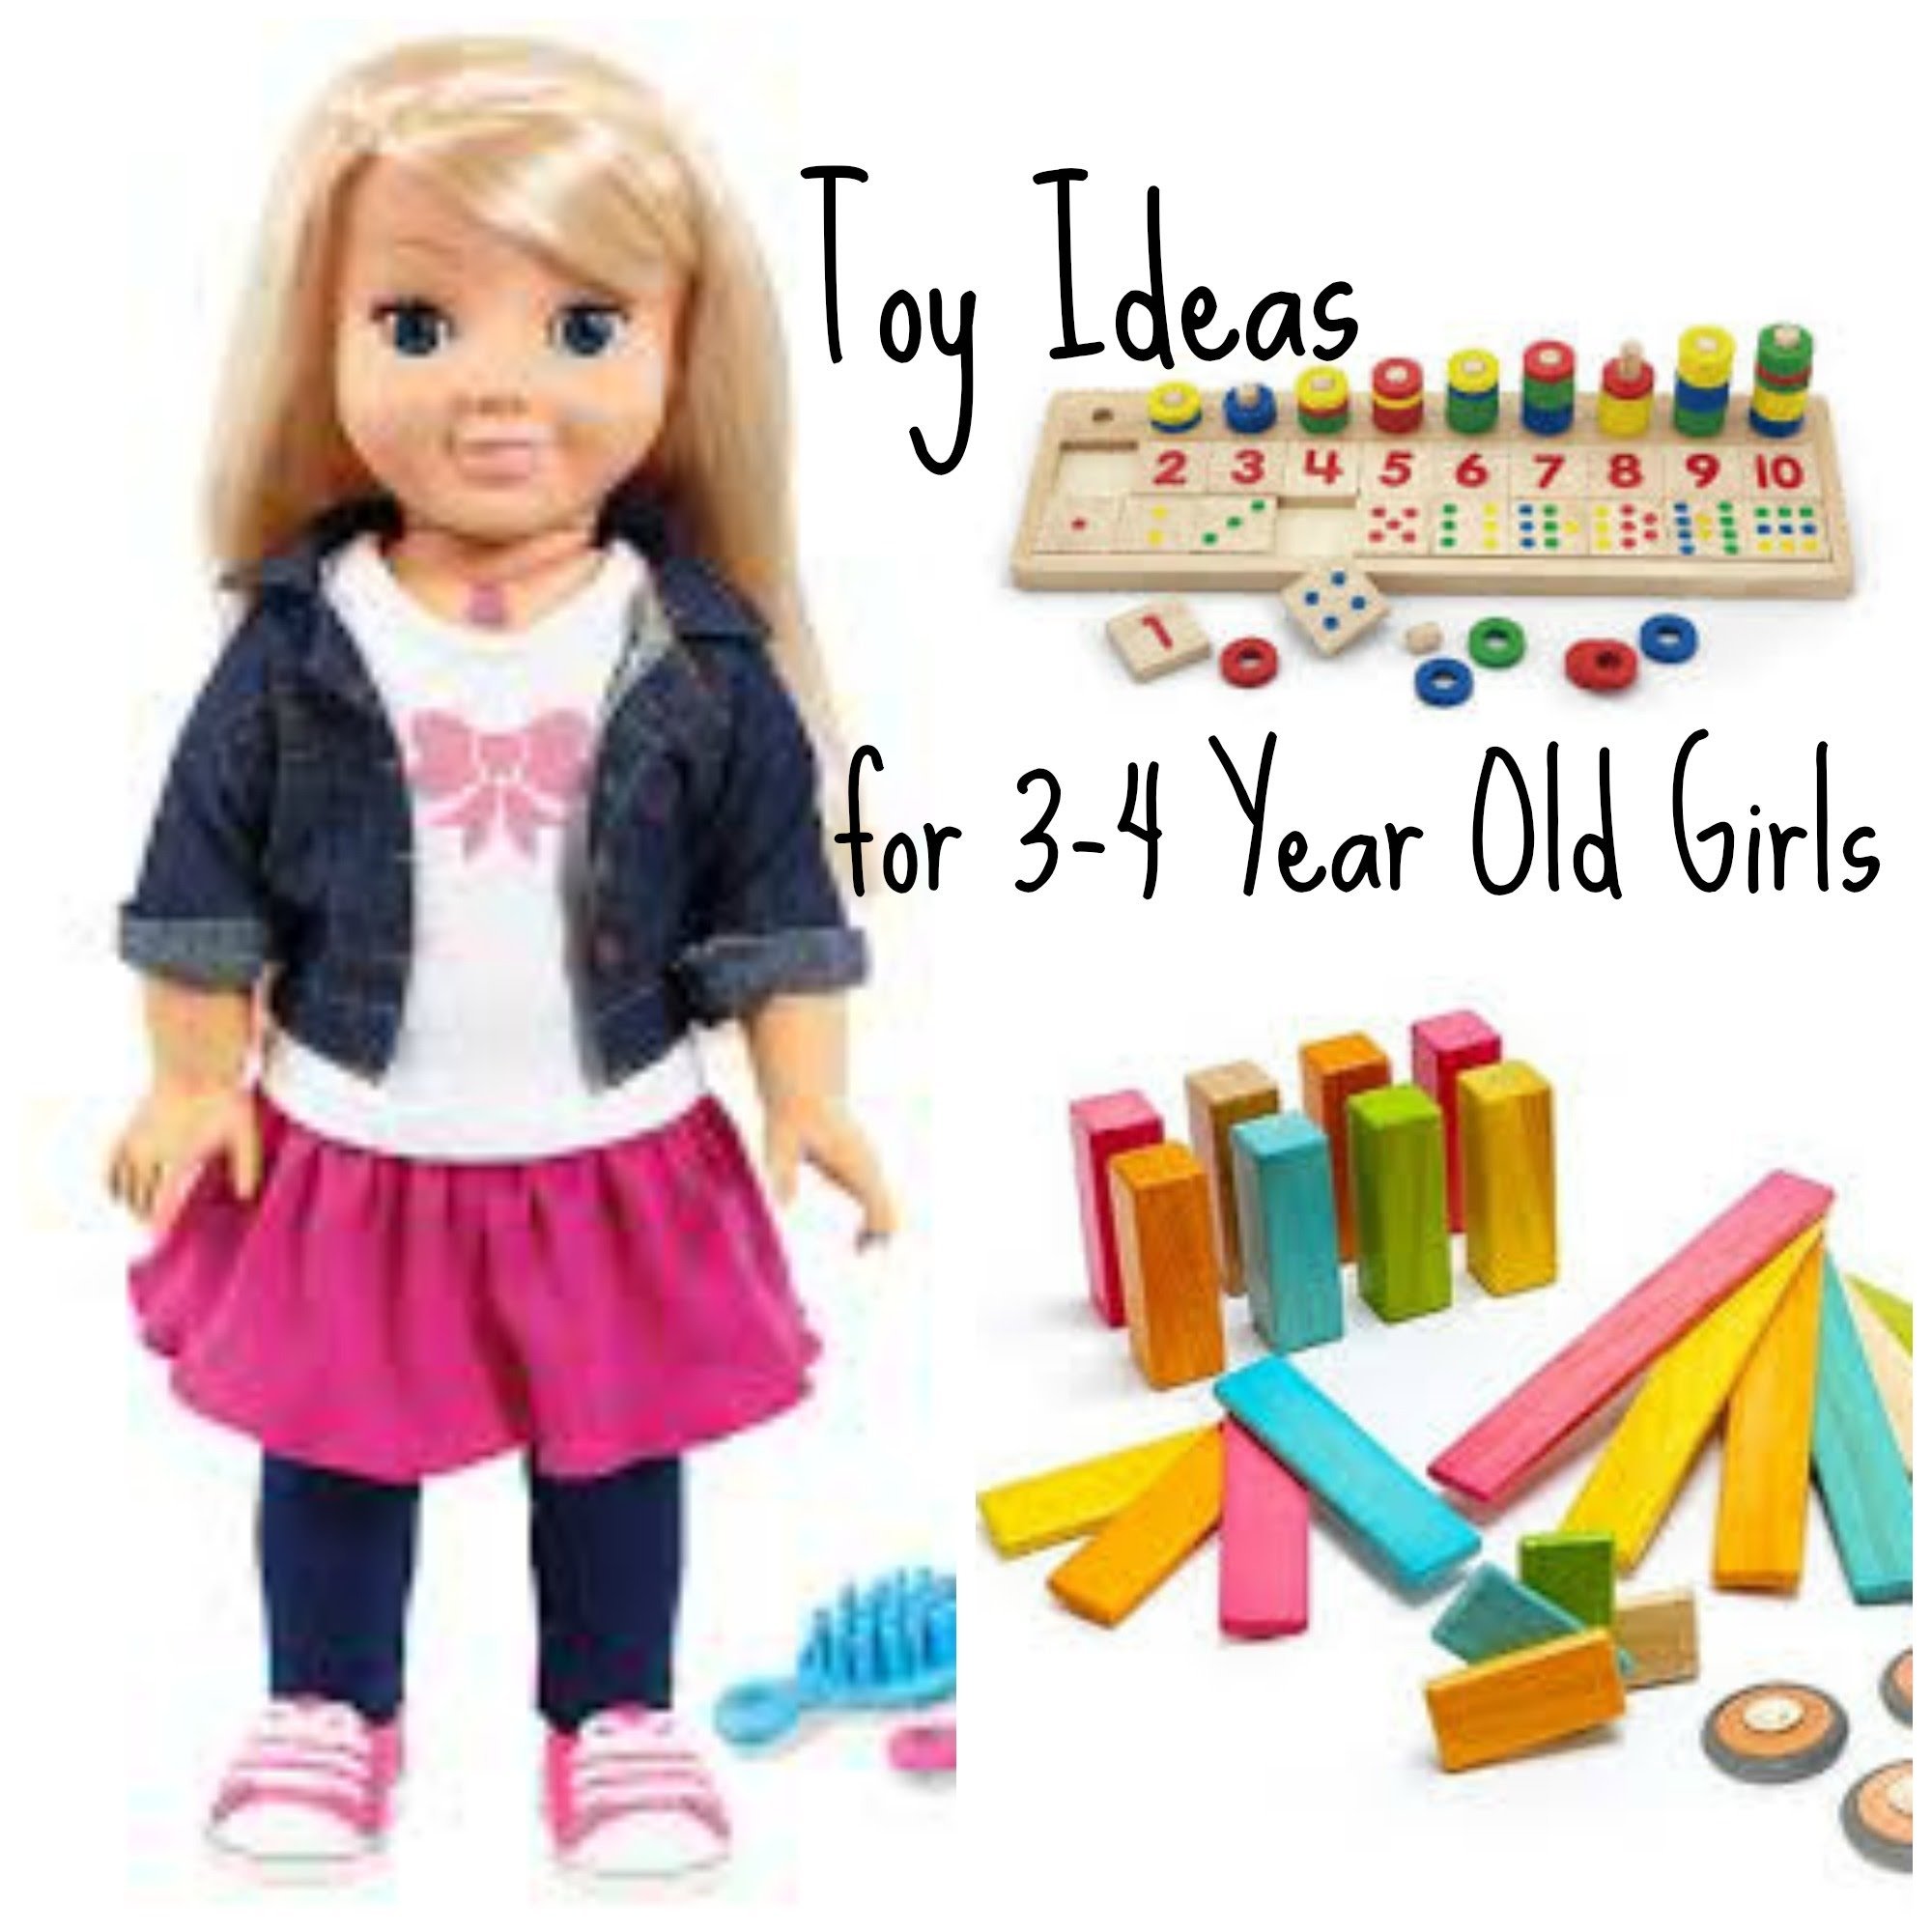 10 Most Recommended Gift Ideas For A 4 Year Old Girl toys 3 4 years old girl all i want for christmas collab youtube 3 2022